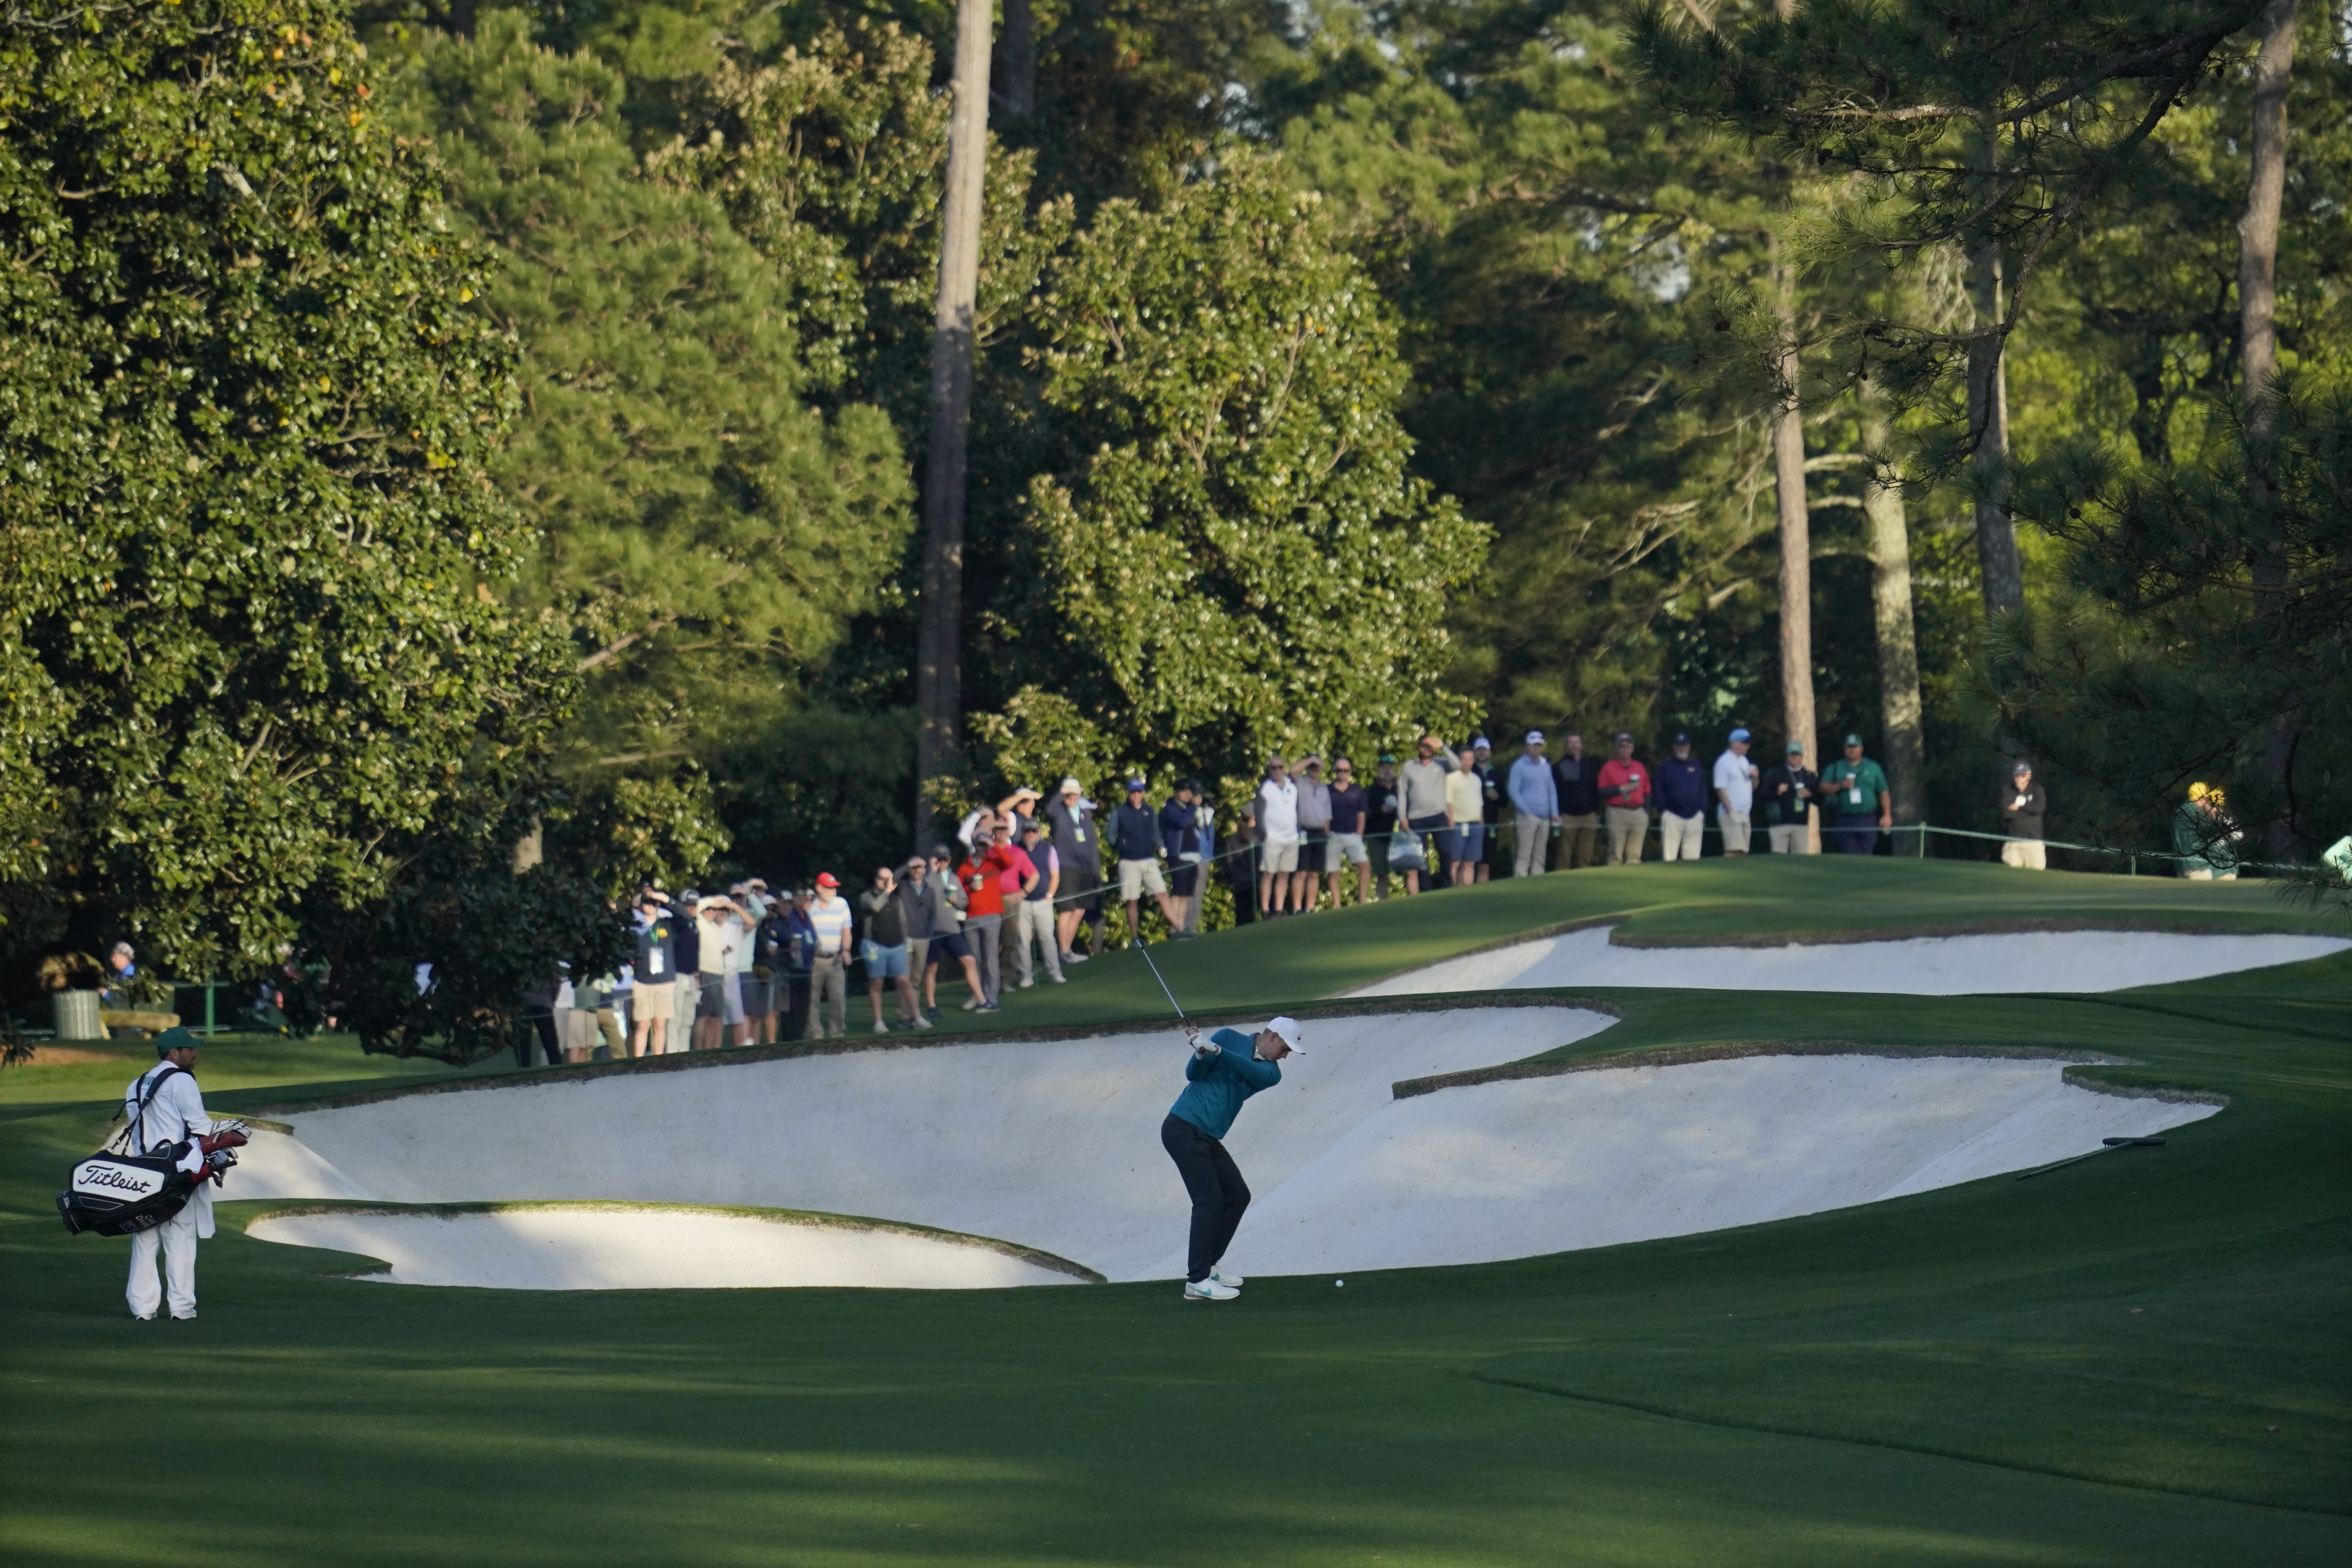 How to watch The Masters 2022 FREE live streams, dates, times, USA TV, channel for golf major